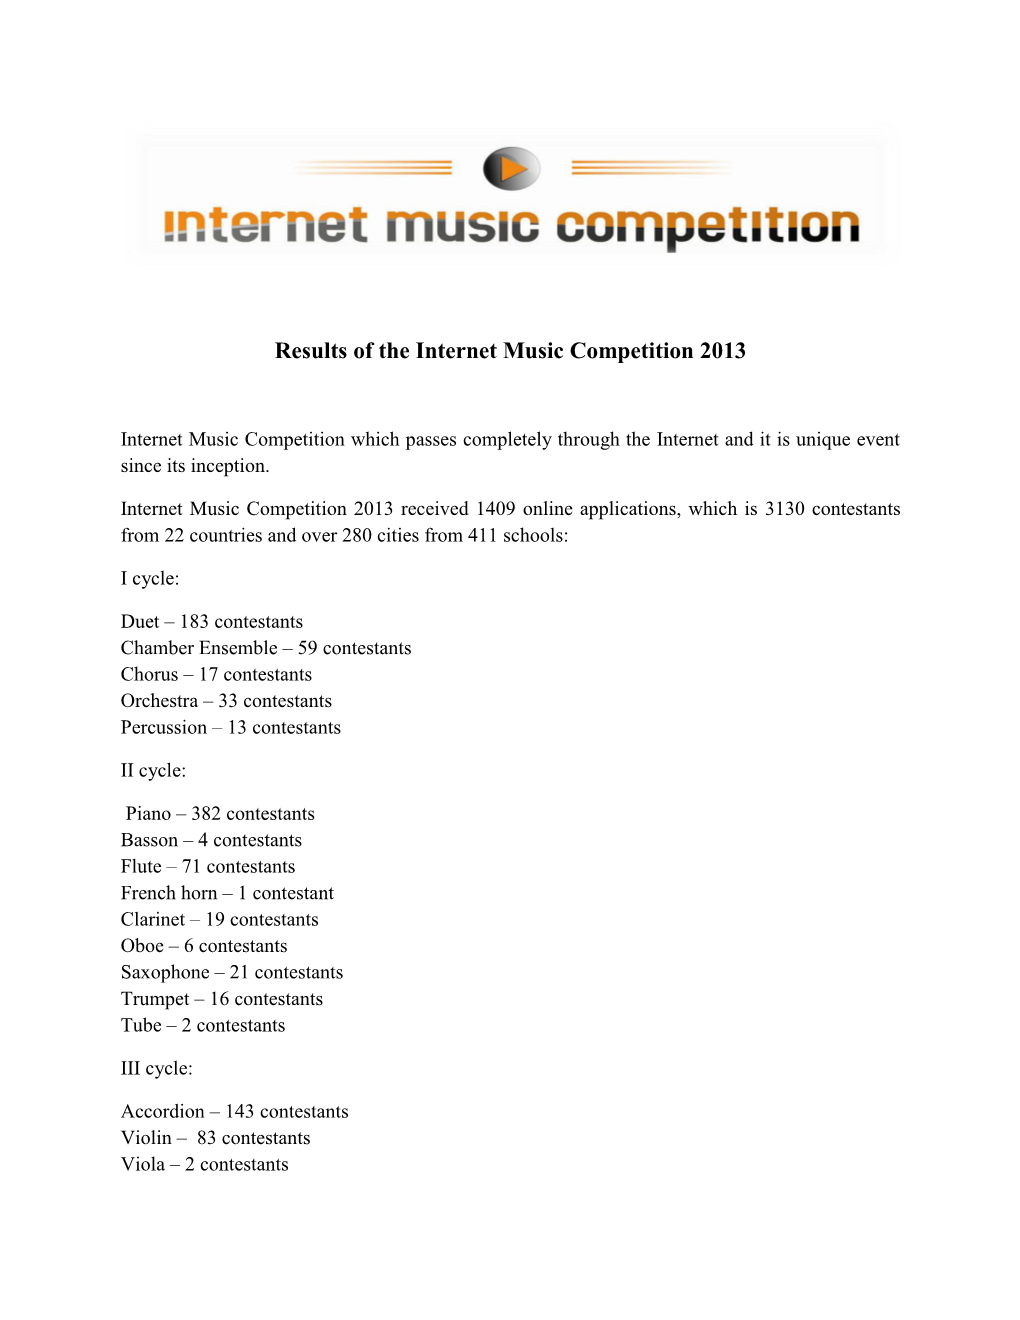 Results of the Internet Music Competition 2013